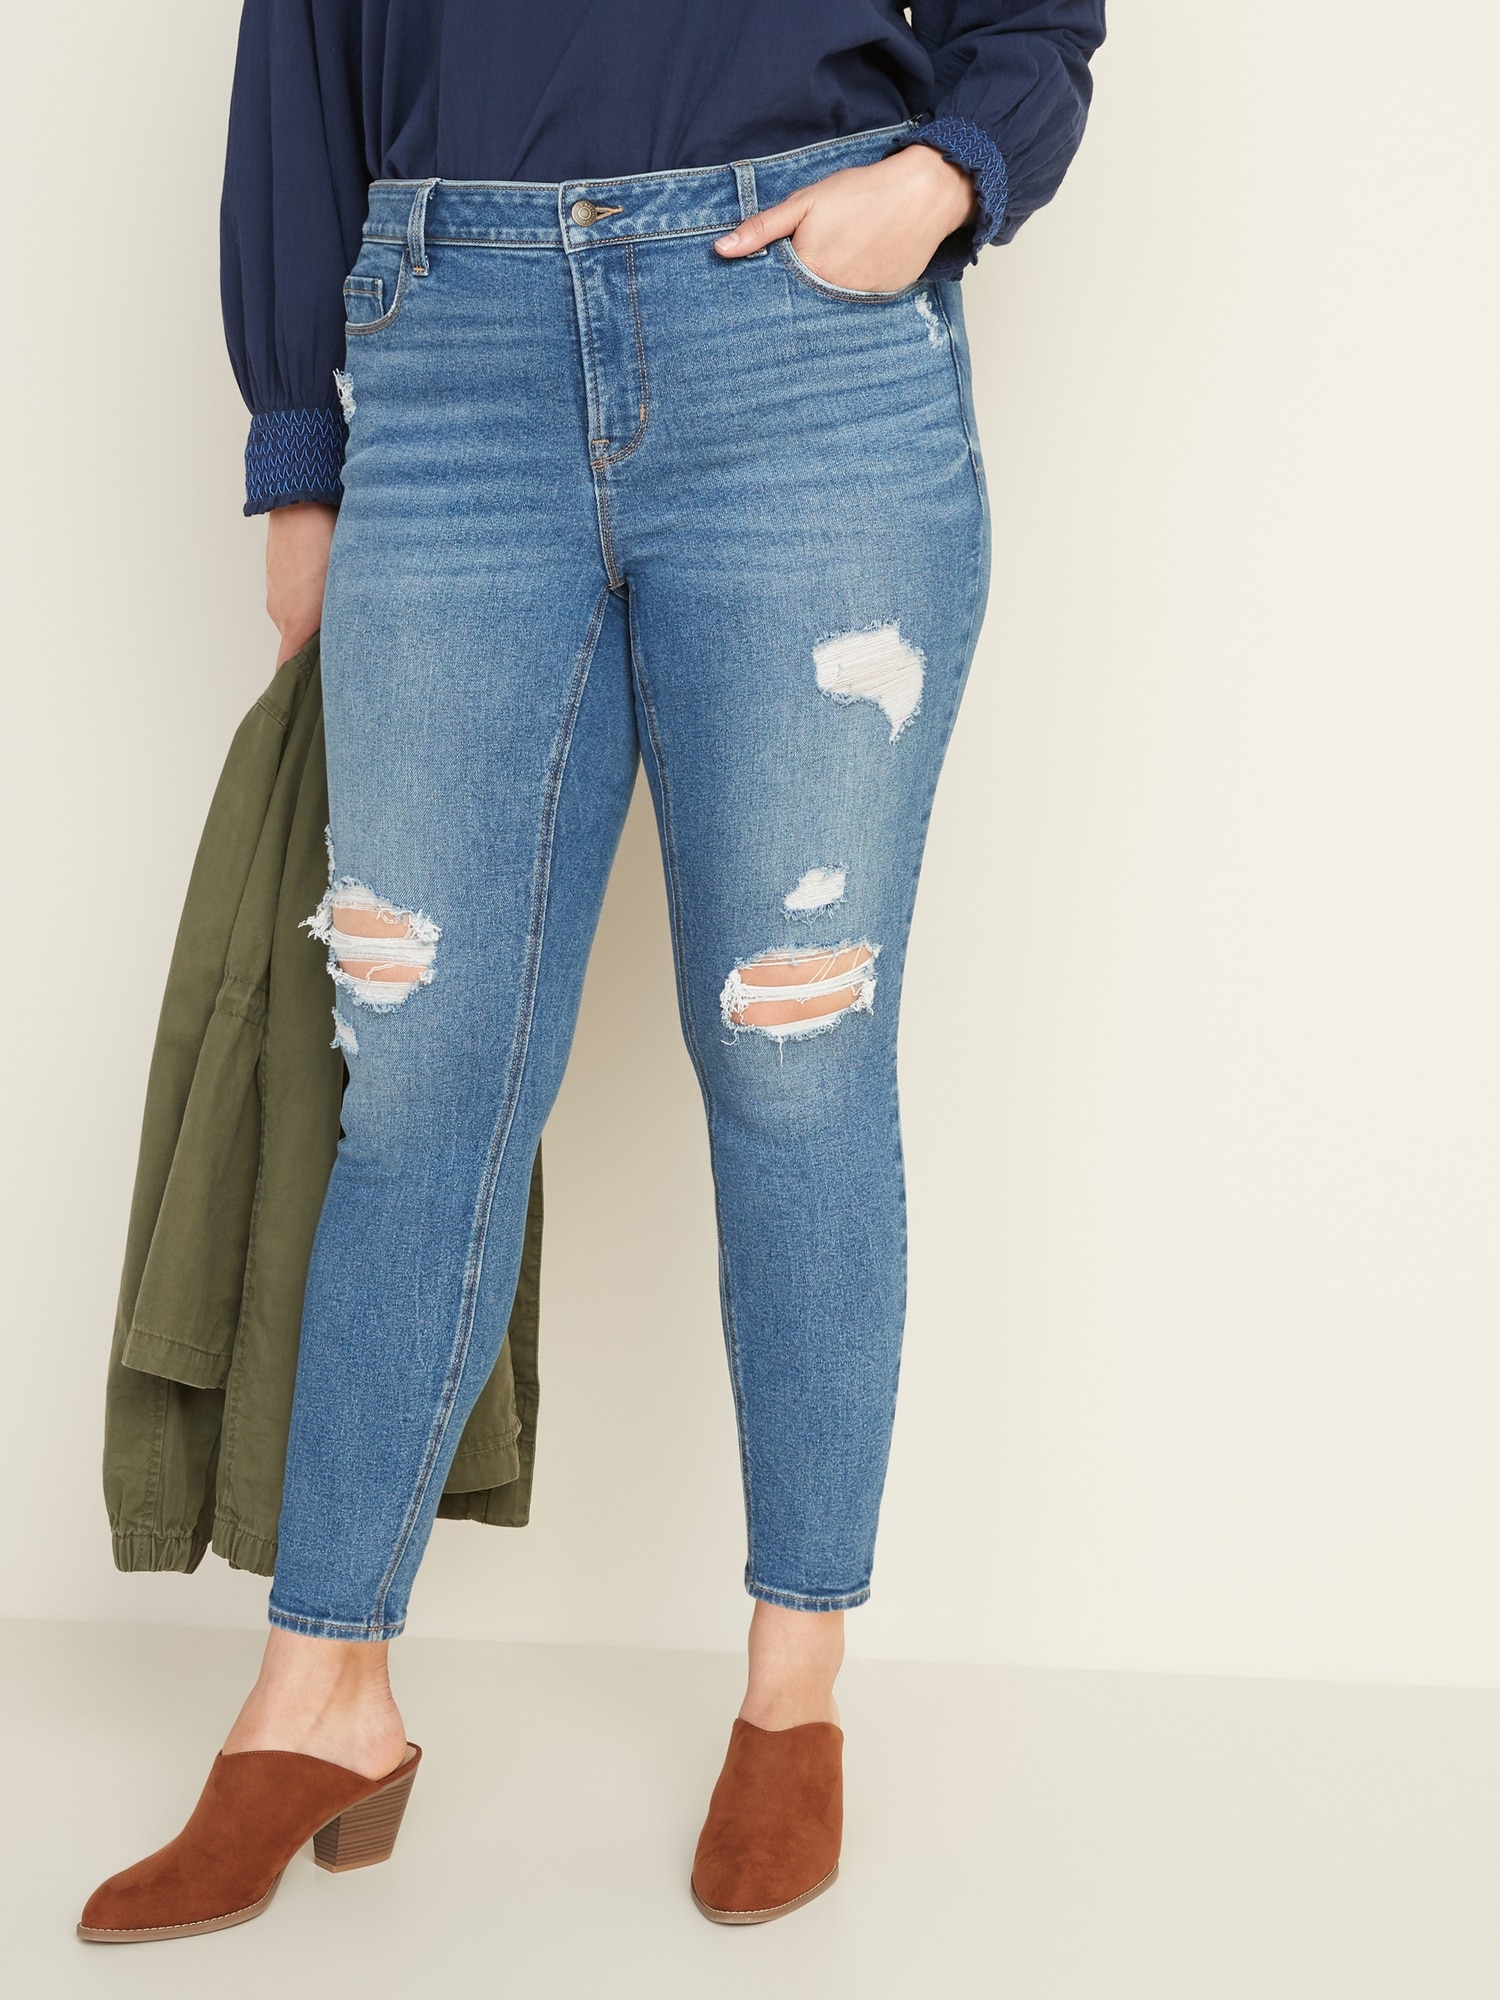 high rise jeans old navy